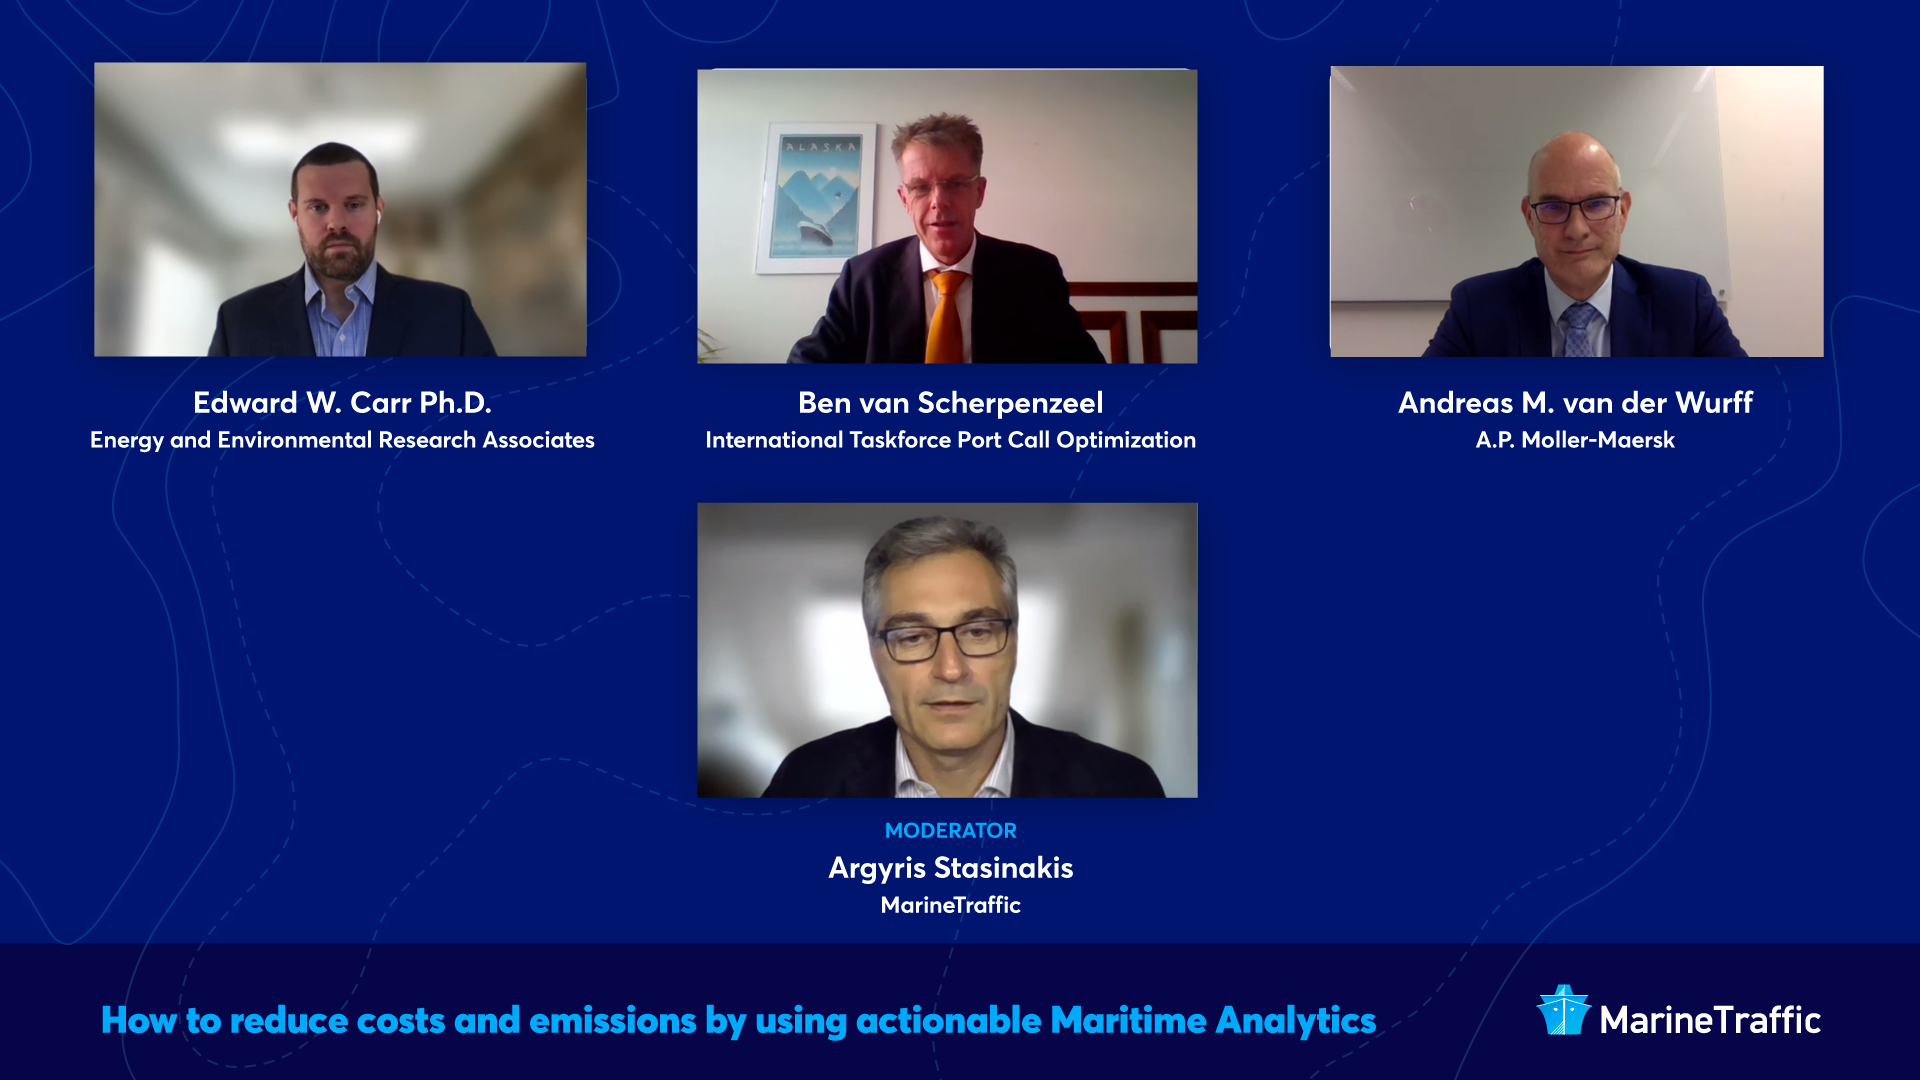 How to reduce costs and emissions by using actionable Maritime Analytics